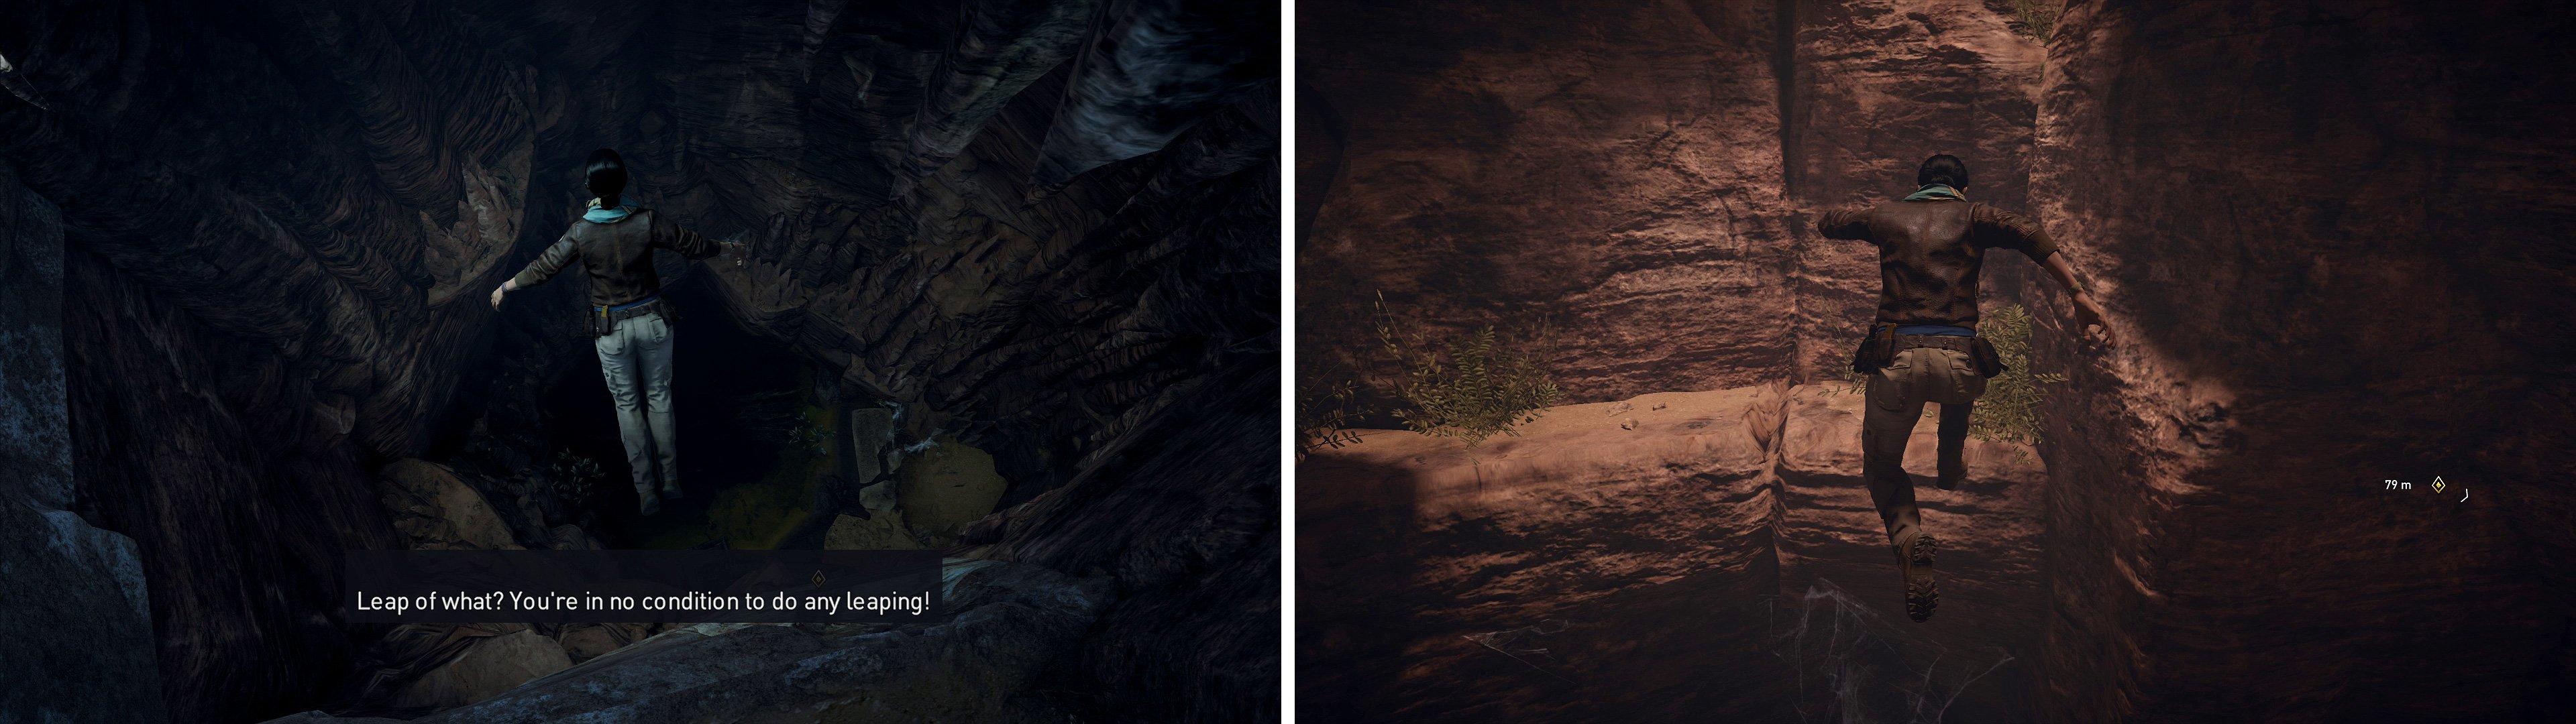 Layla decides to copy her ancestor. Climb out of the cave to get back to the Animus.